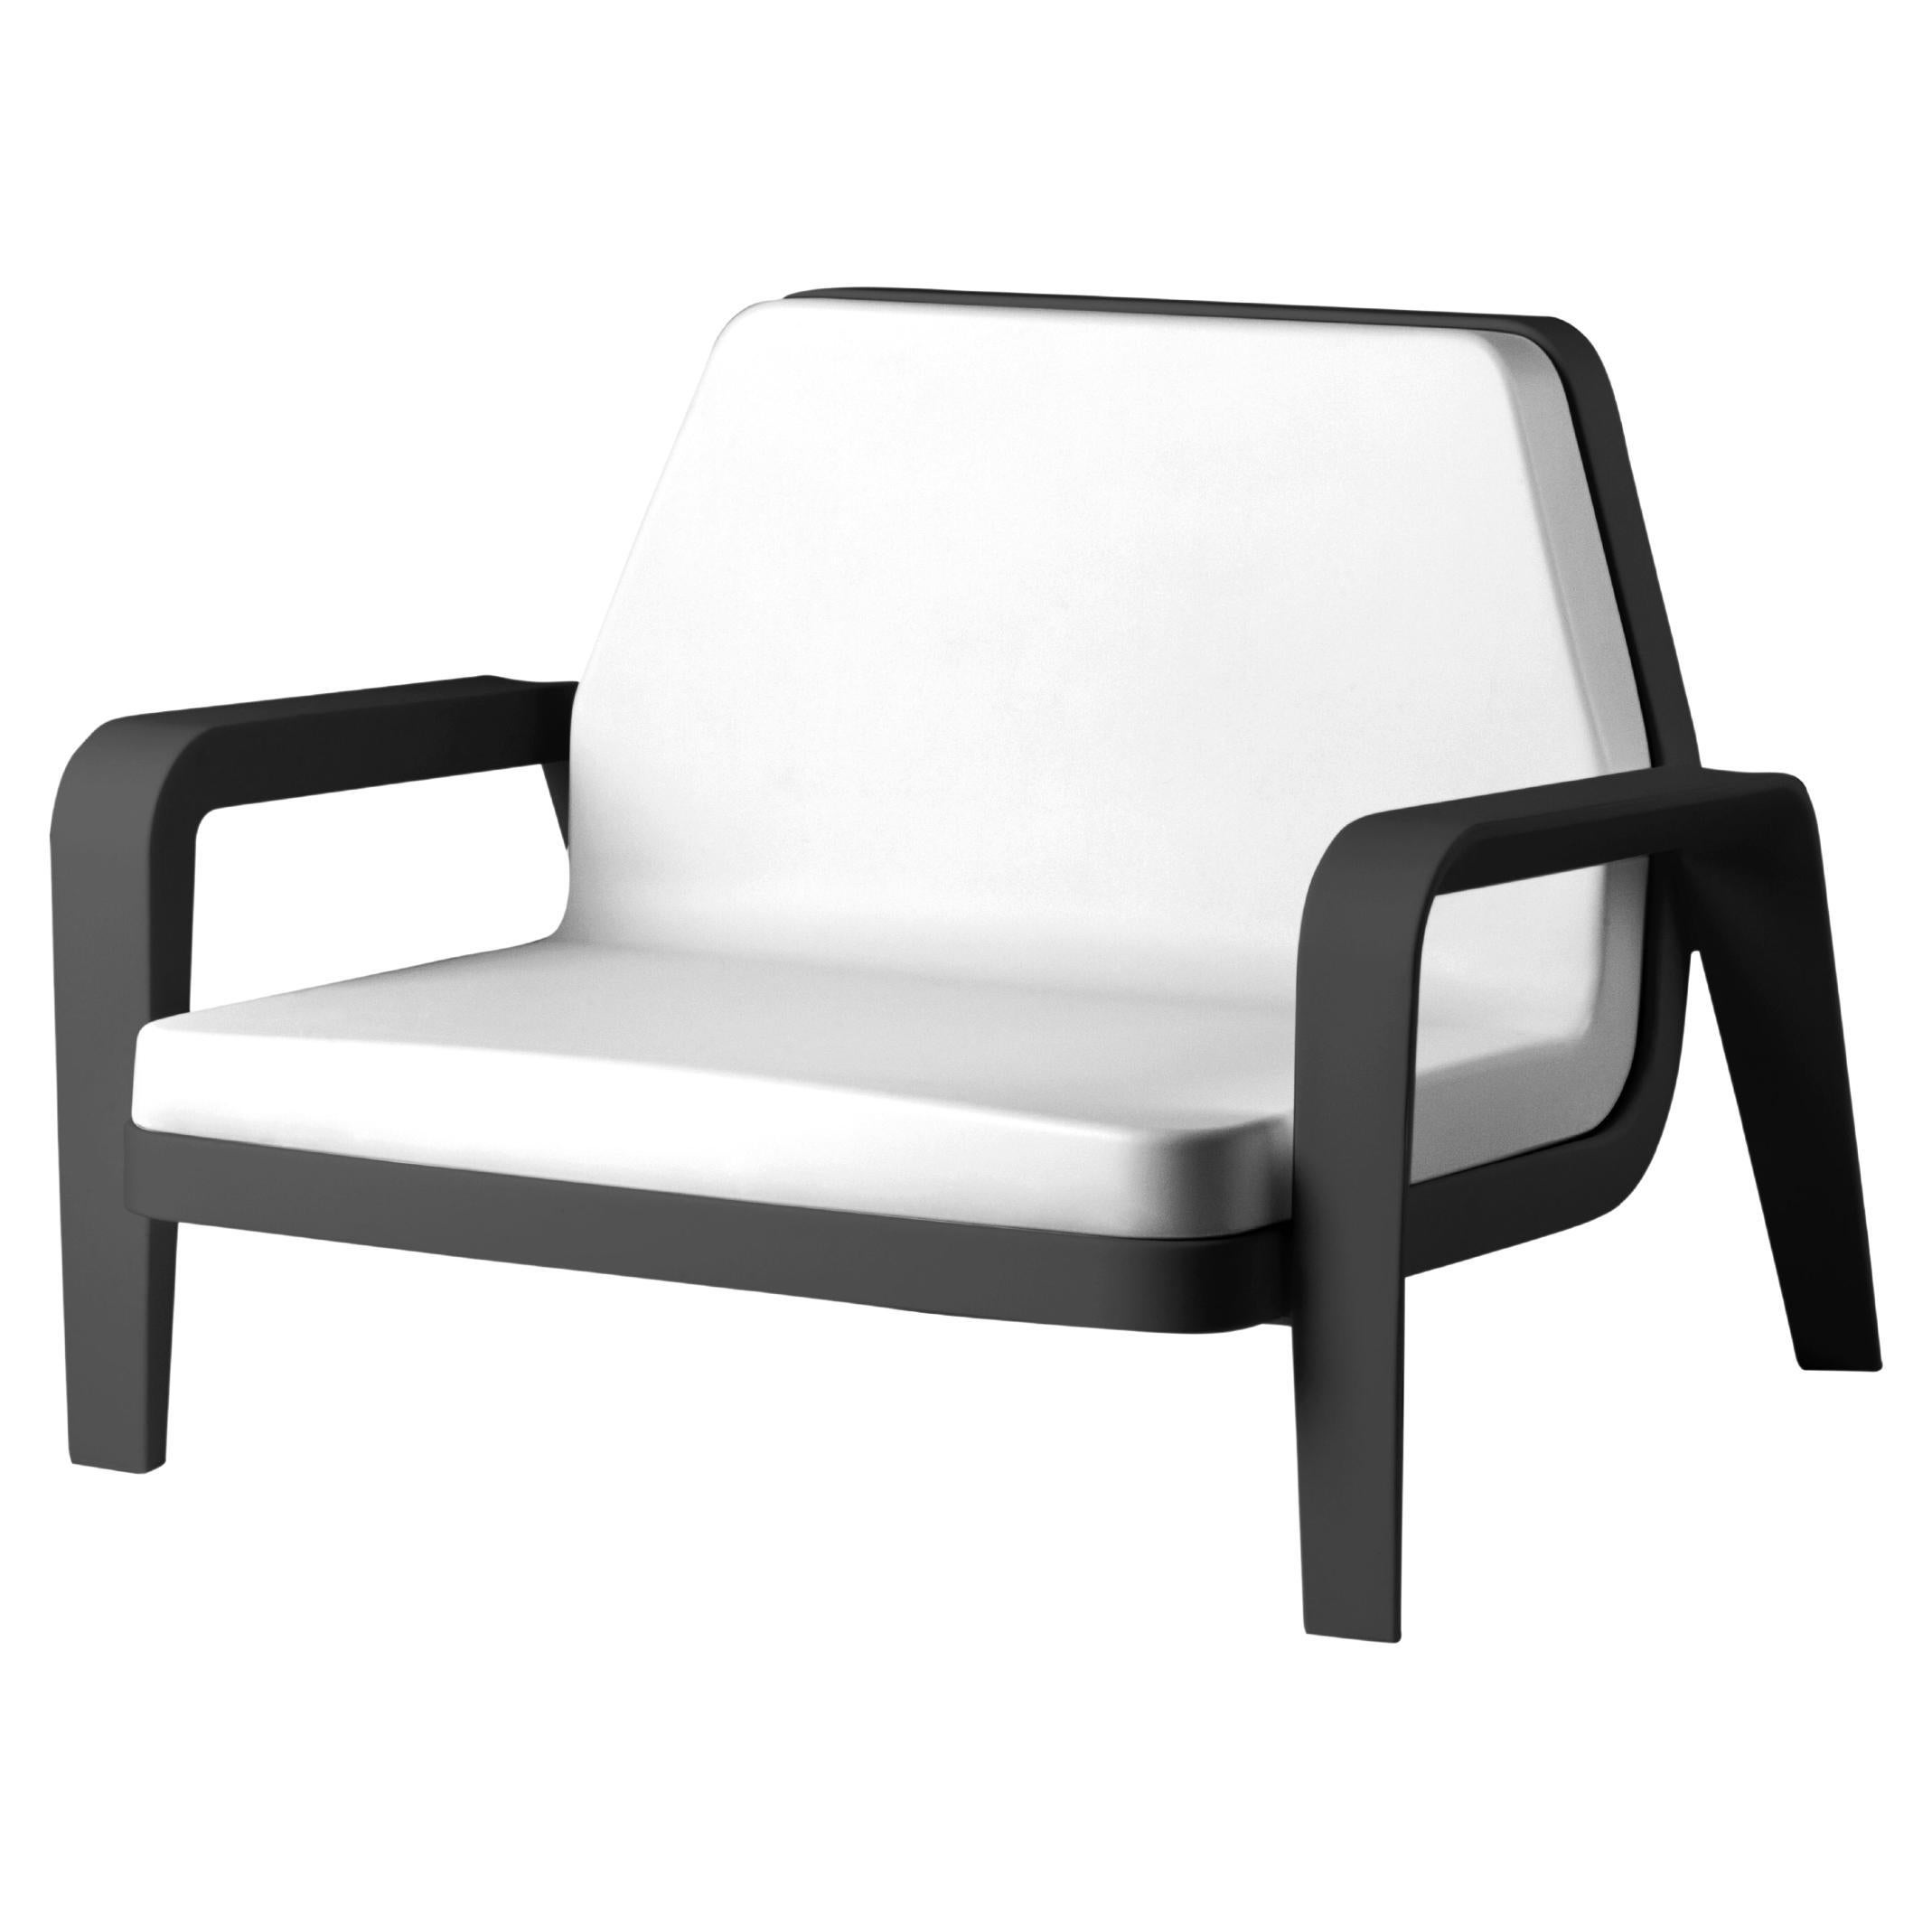 Slide Design America Armchair in Soft White Fabric with Jet Black Frame For Sale